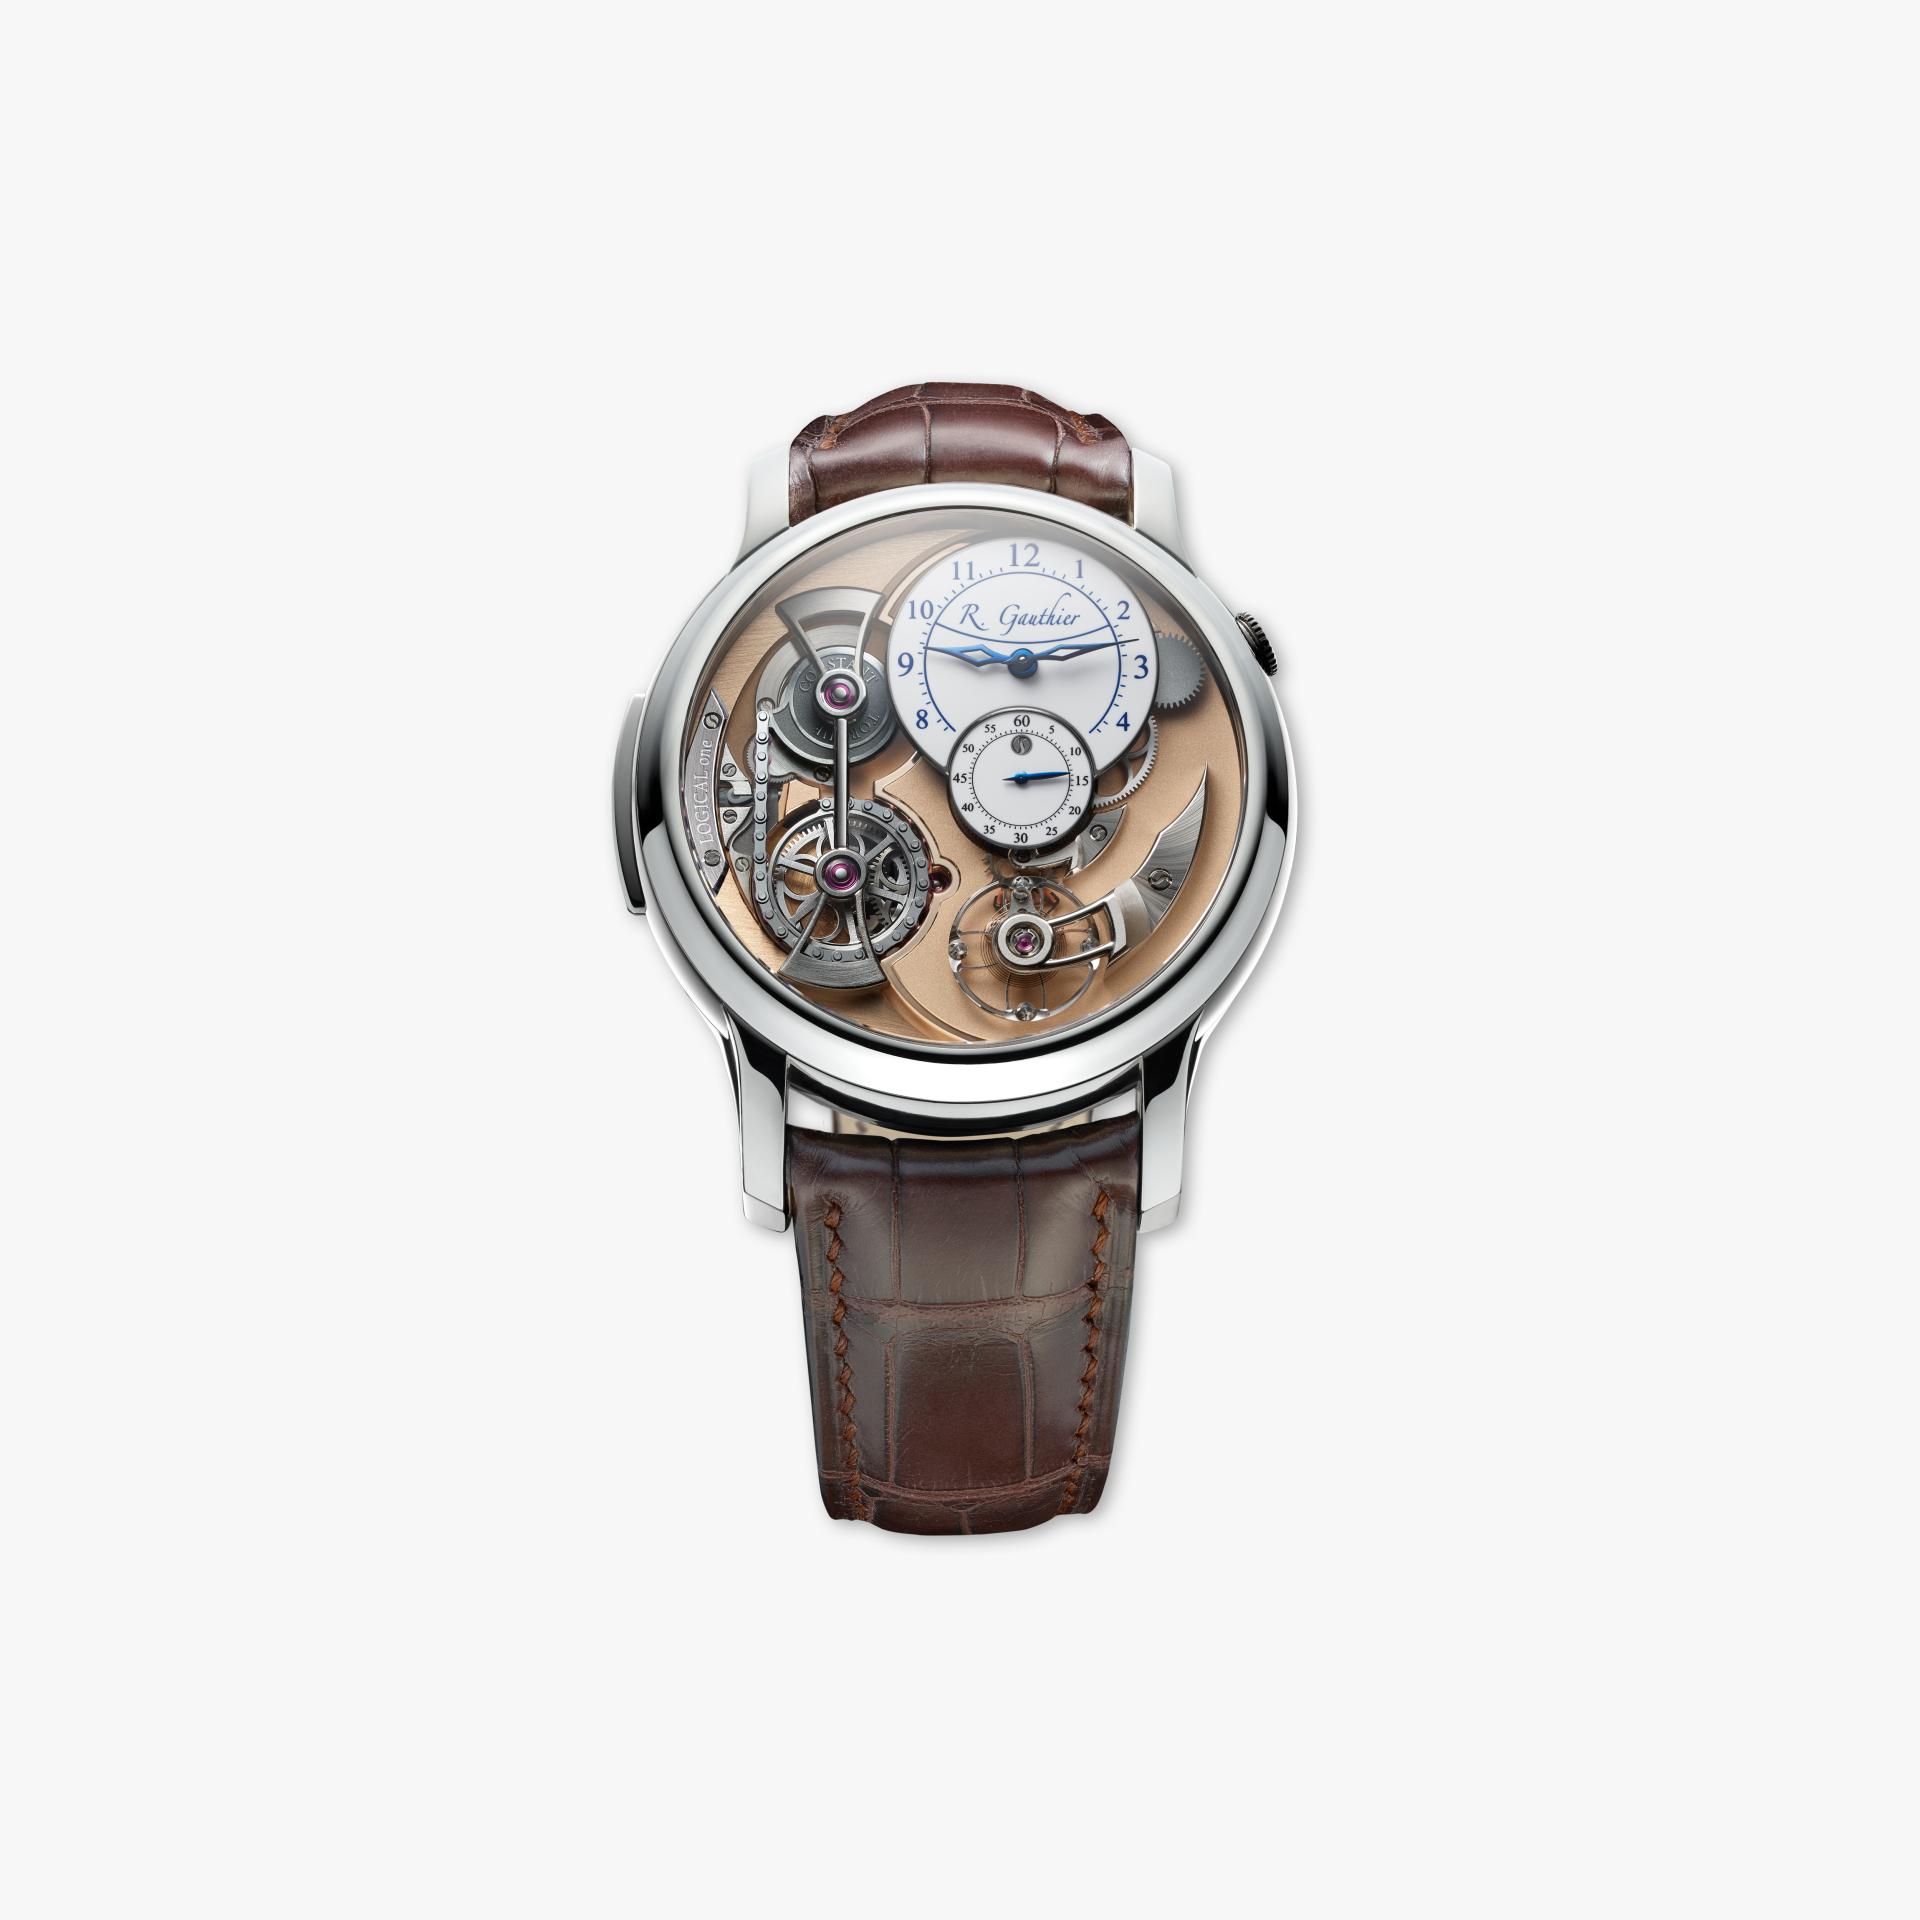 Heritage Logical One  made by Romain Gauthier